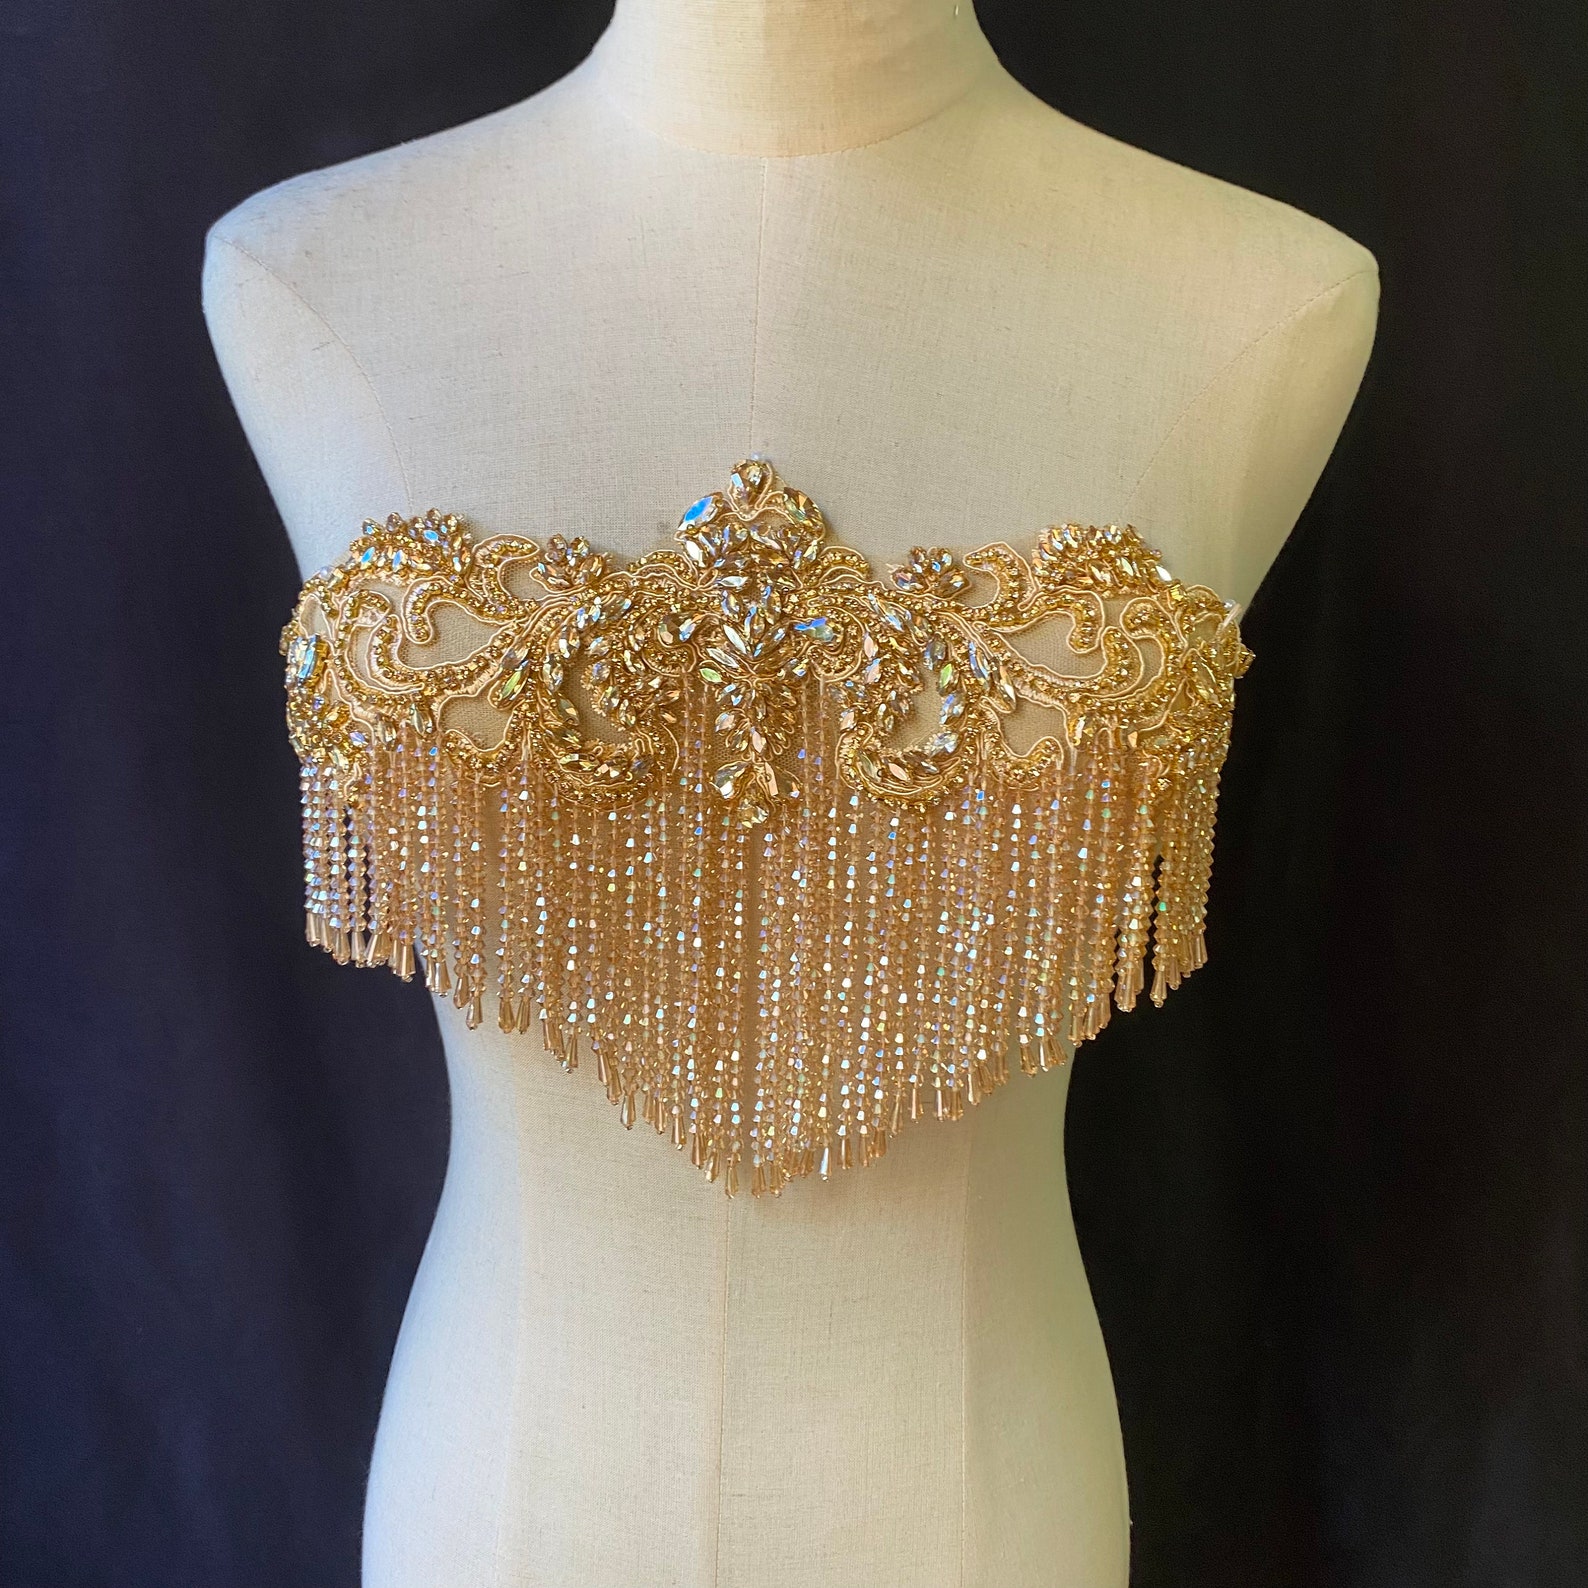 Rhinestone Applique With Crystal Fringe for Party Dress Body - Etsy